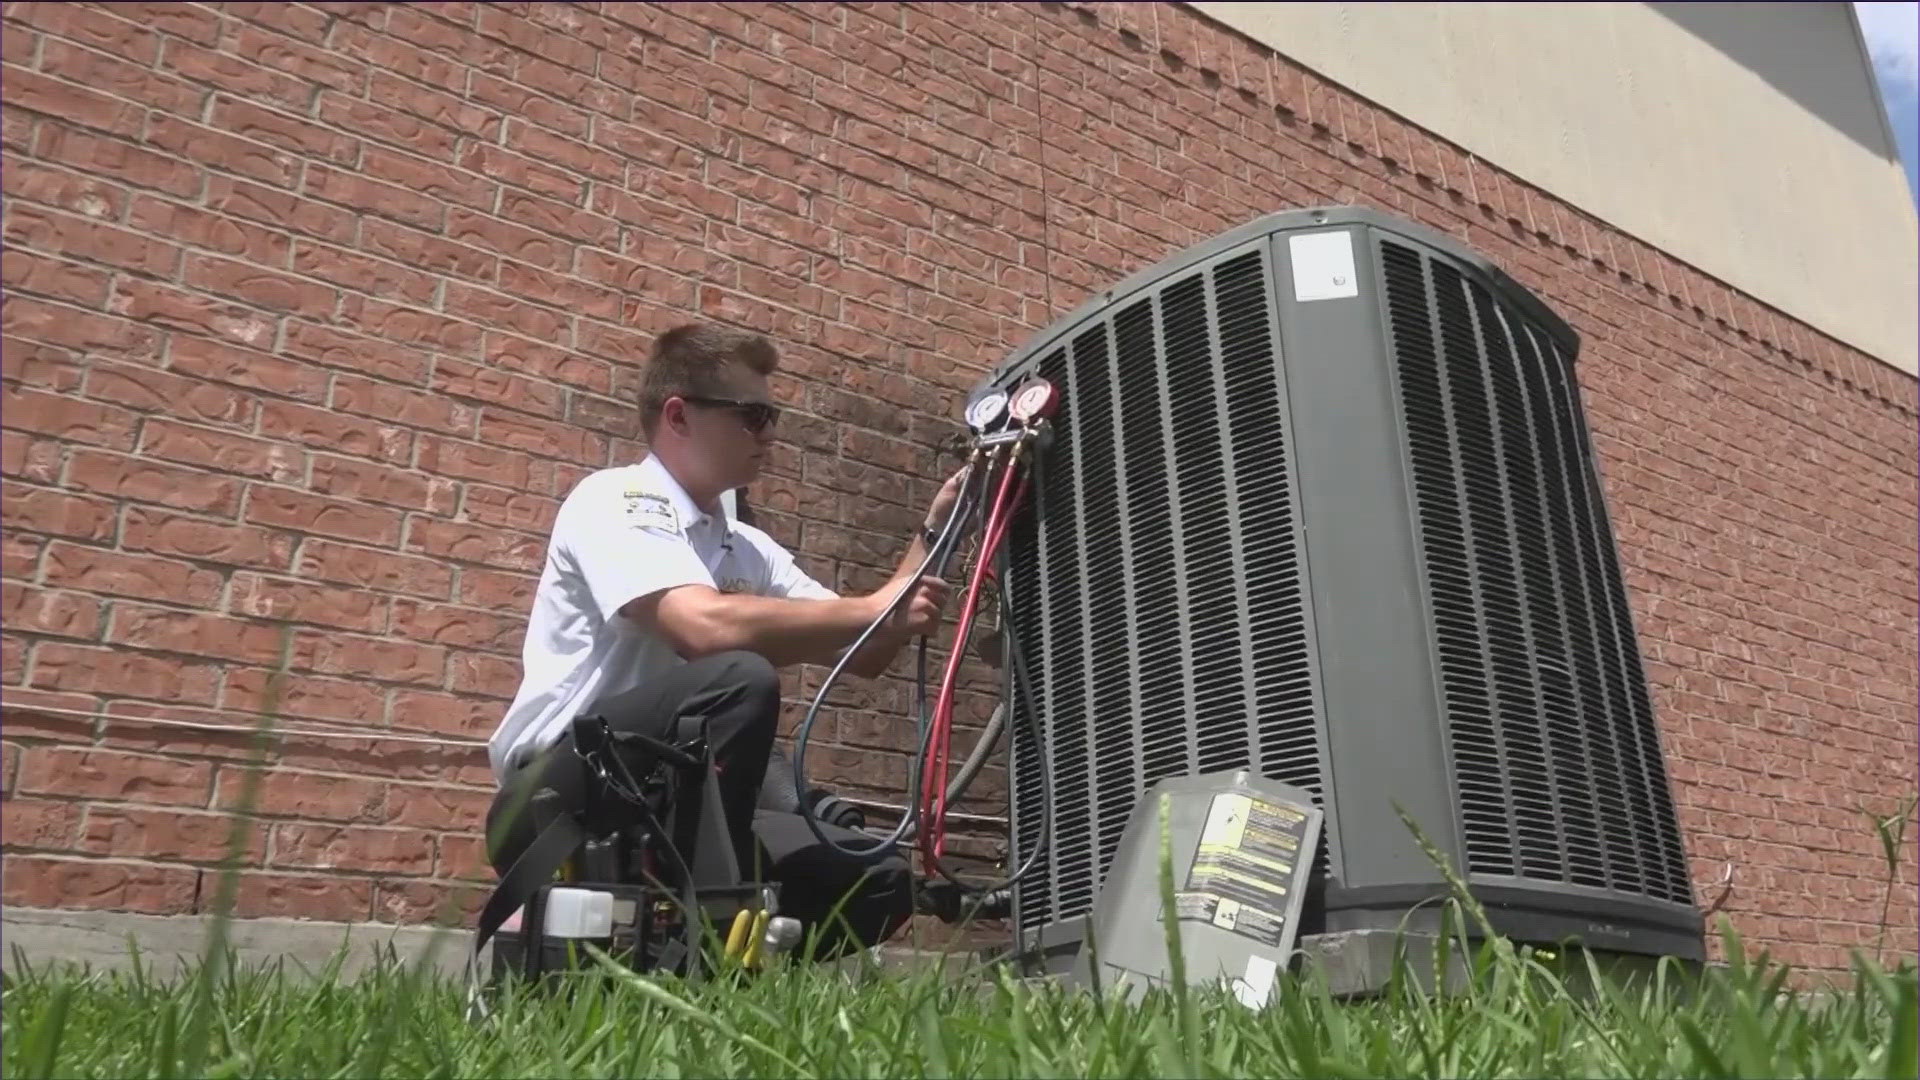 We're entering the time of year when our AC units are working hard. And if you're not maintaining your units properly, things can get expensive.